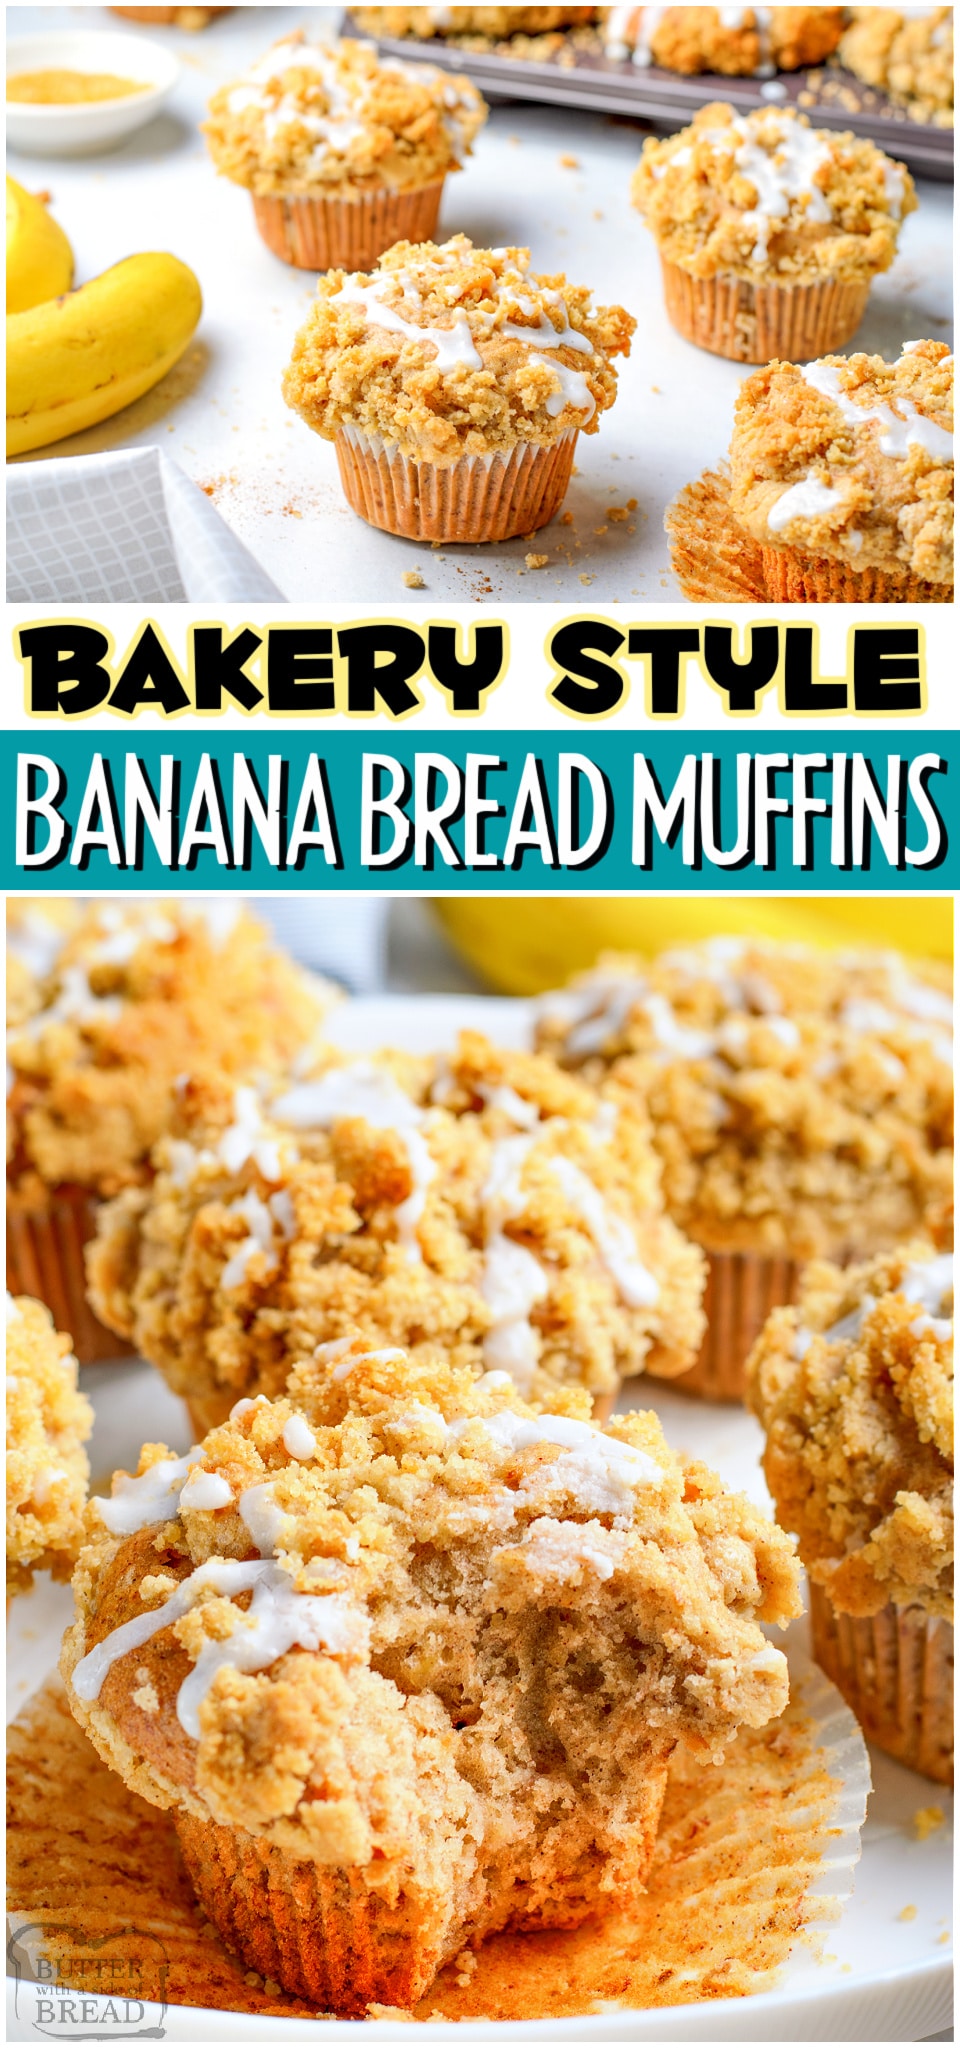 Banana Bread Muffins with crumble topping are easy and delicious! Tender & moist bakery-style banana muffins with a cinnamon brown sugar topping then drizzled with vanilla glaze.